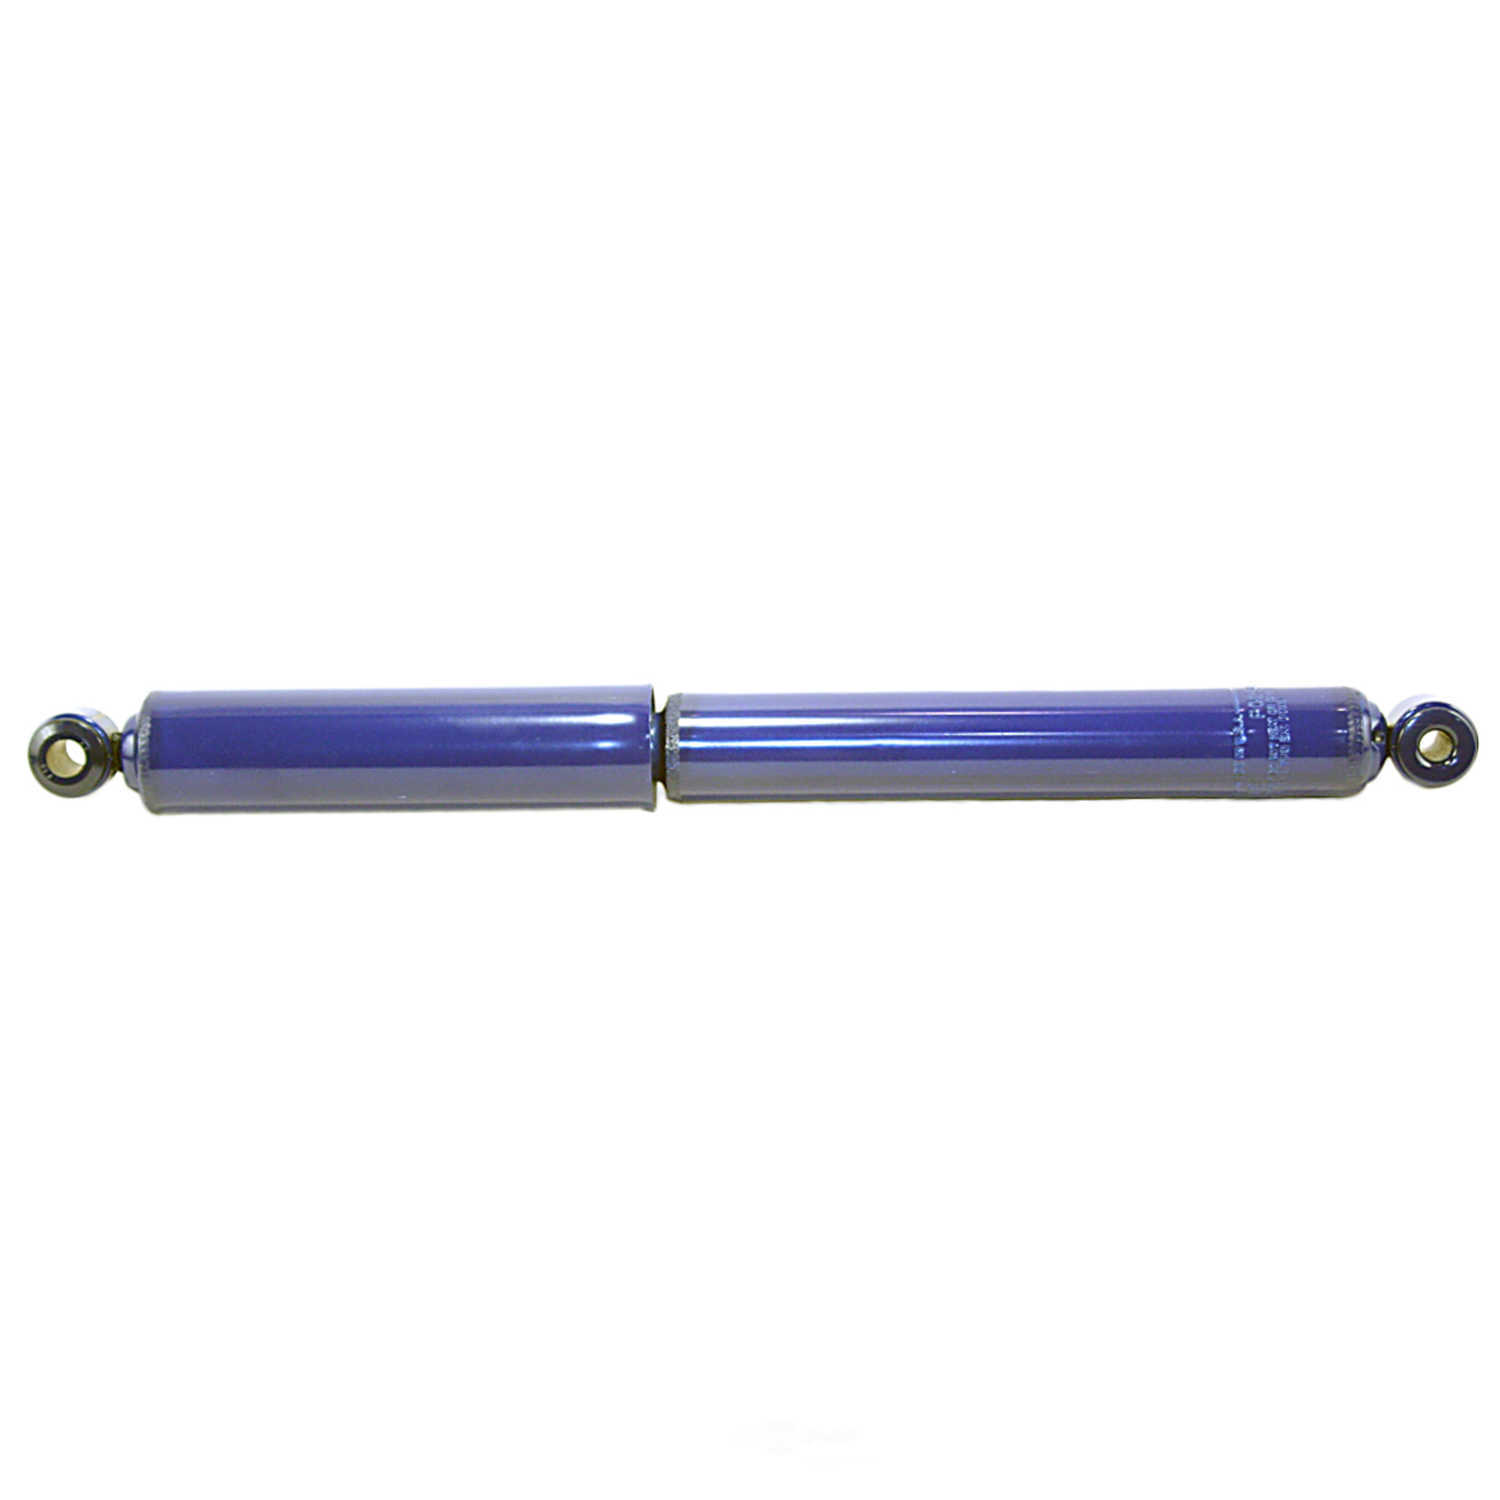 MONROE SHOCKS/STRUTS - Monro-Matic Plus Shock Absorber (With ABS Brakes, Front) - MOE 32358